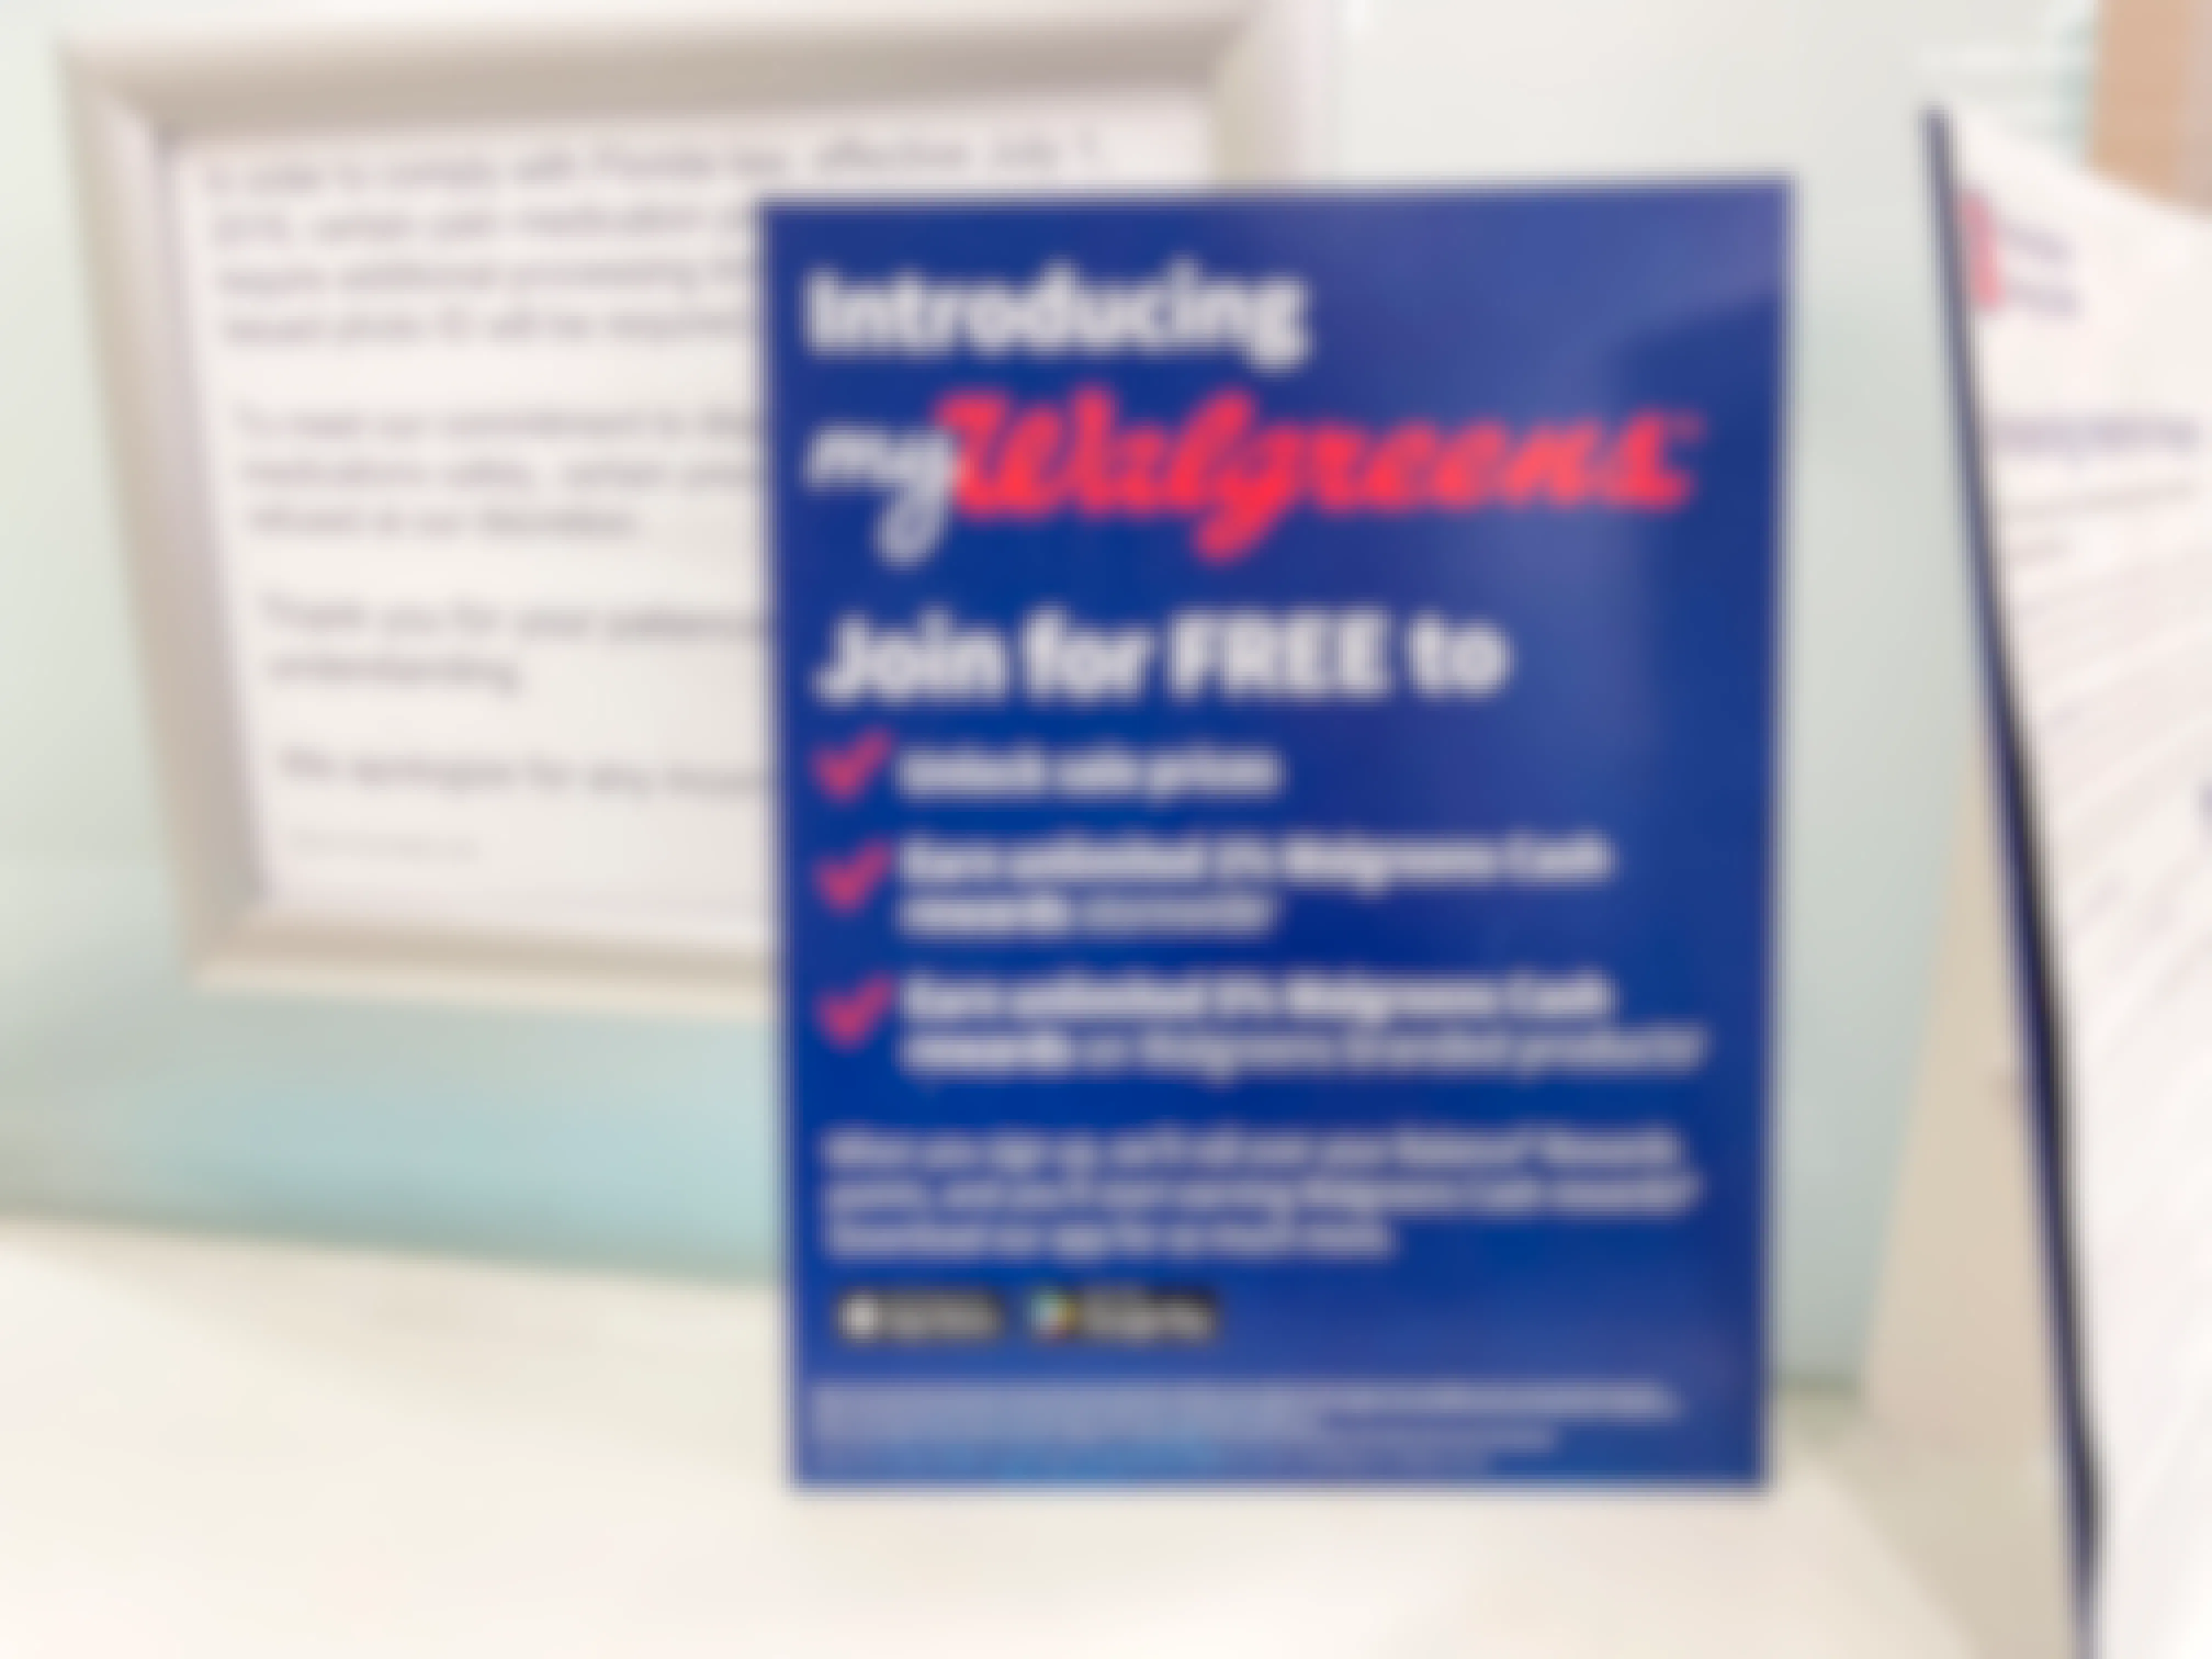 A sign for the myWalgreens rewards program on a counter in walgreens